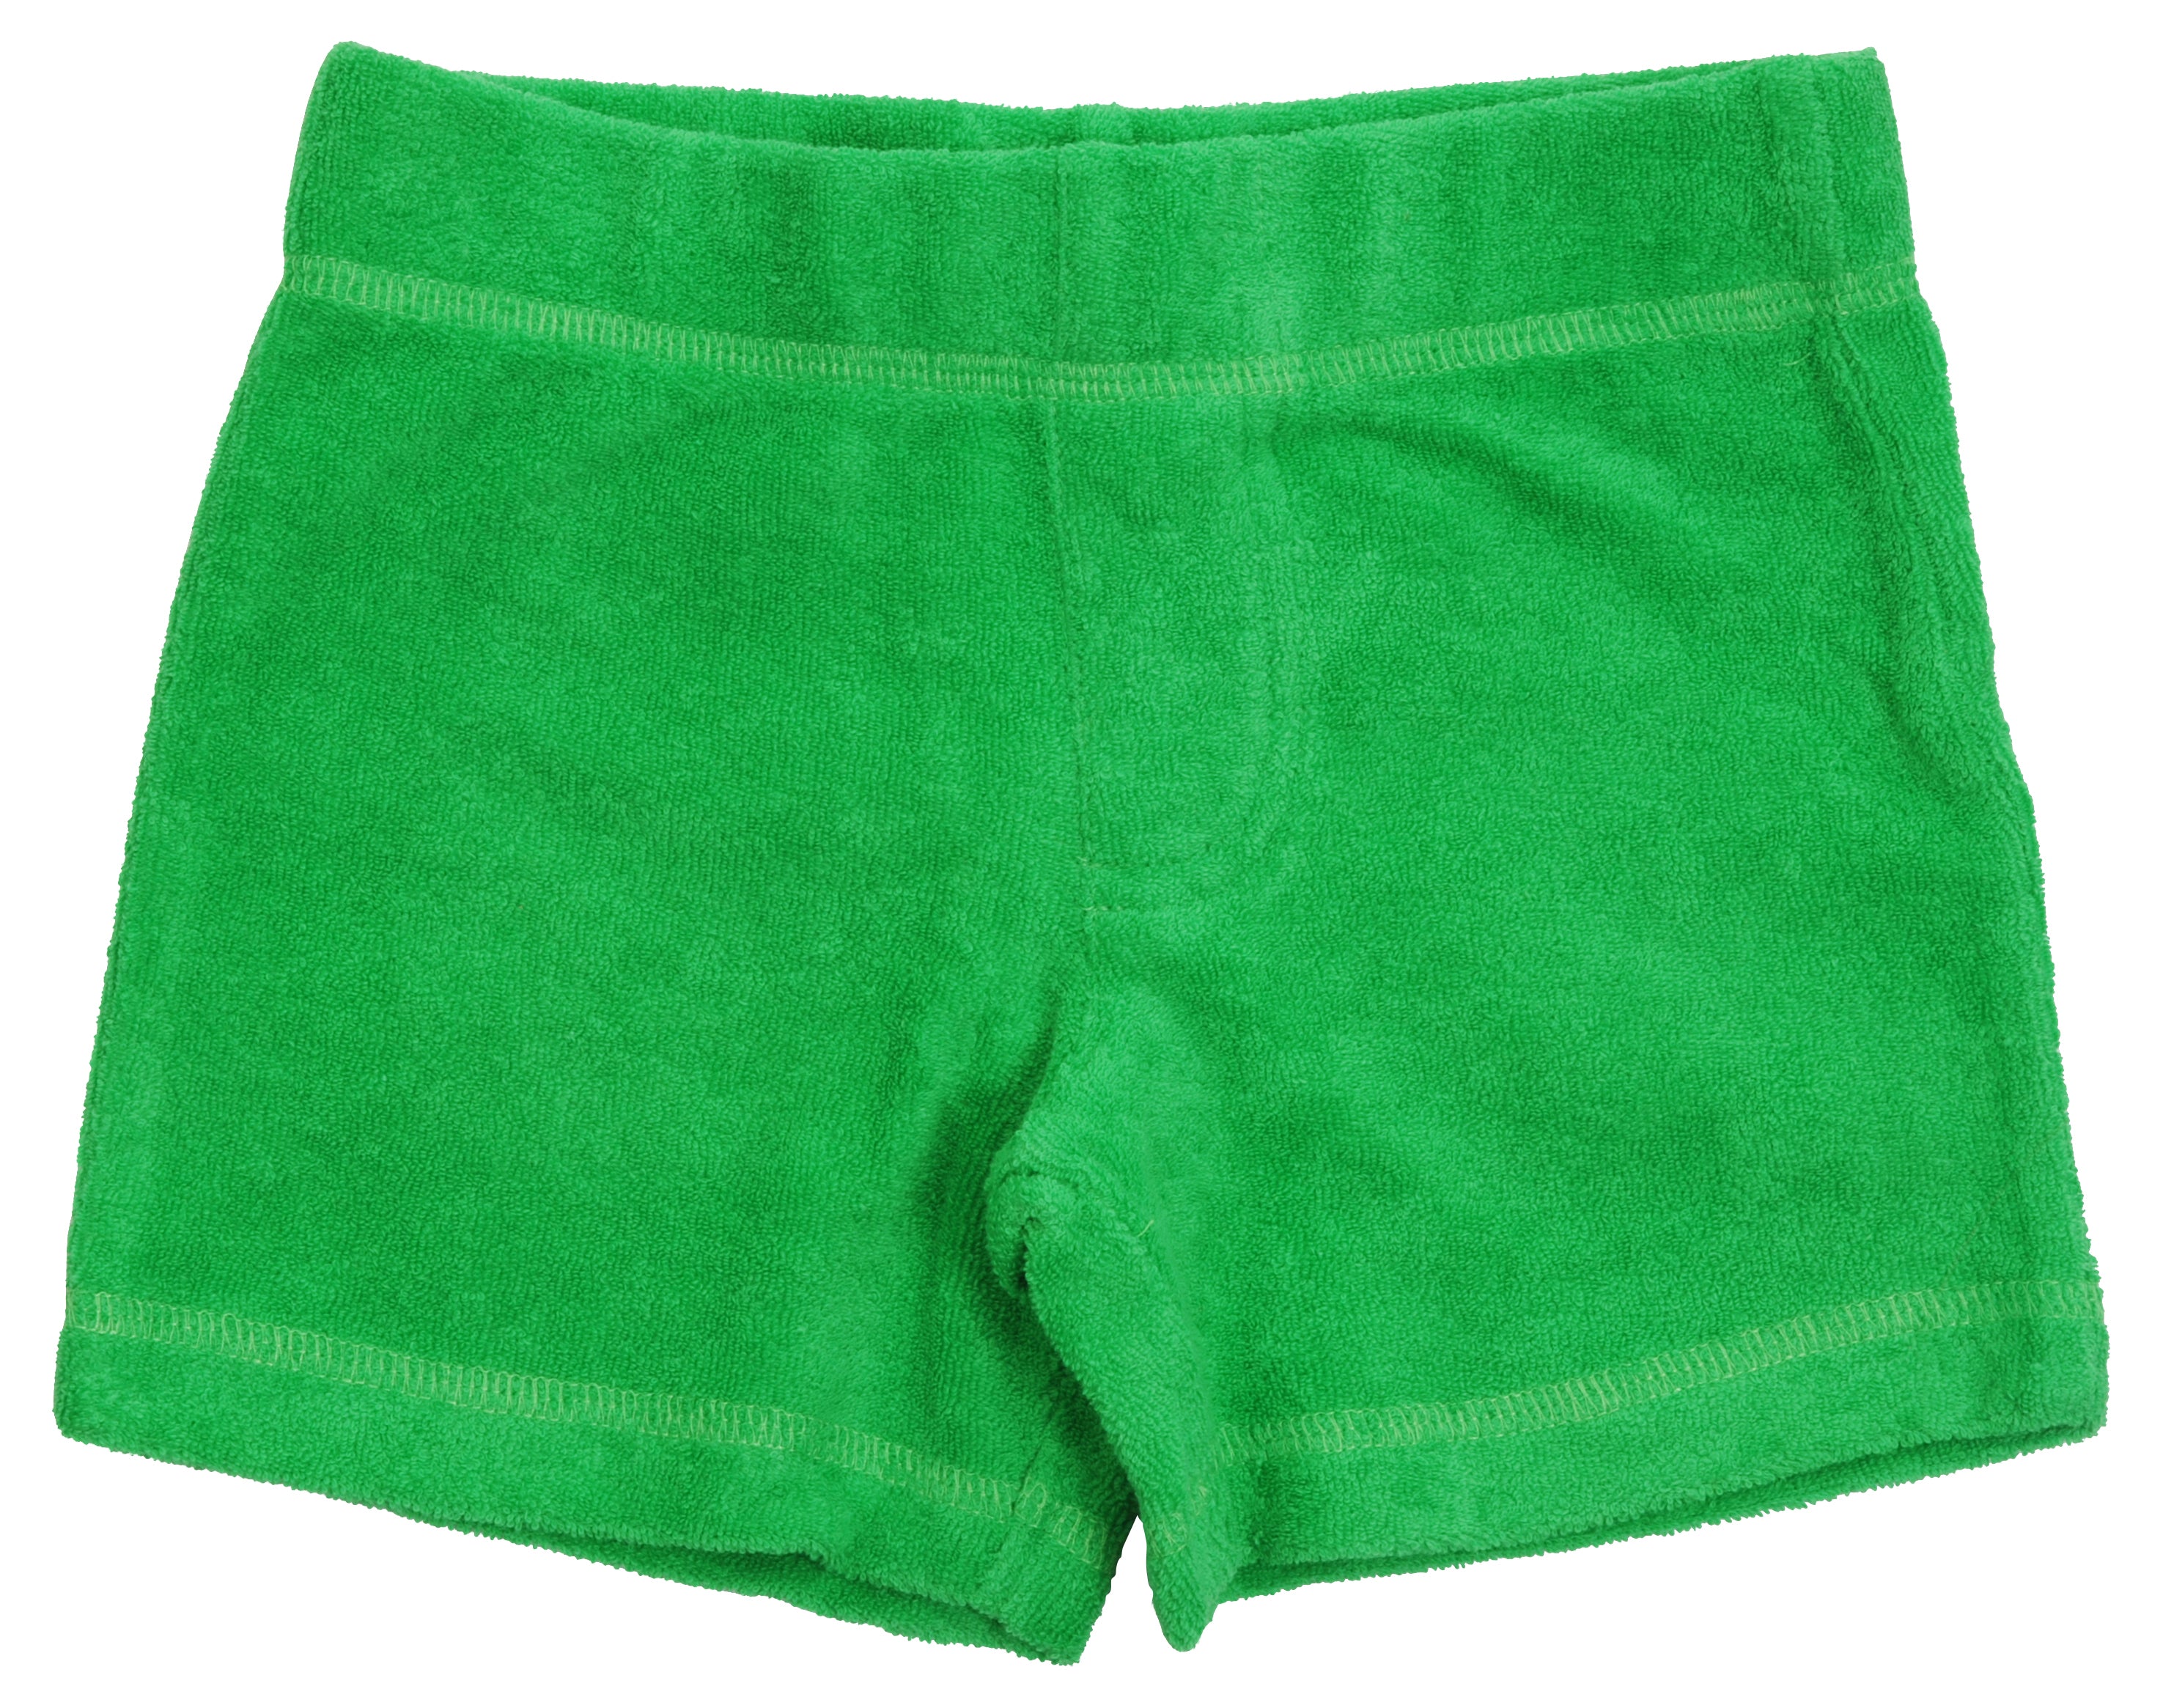 Duns Sweden - Shorts - Terry Cotton - Classic Green